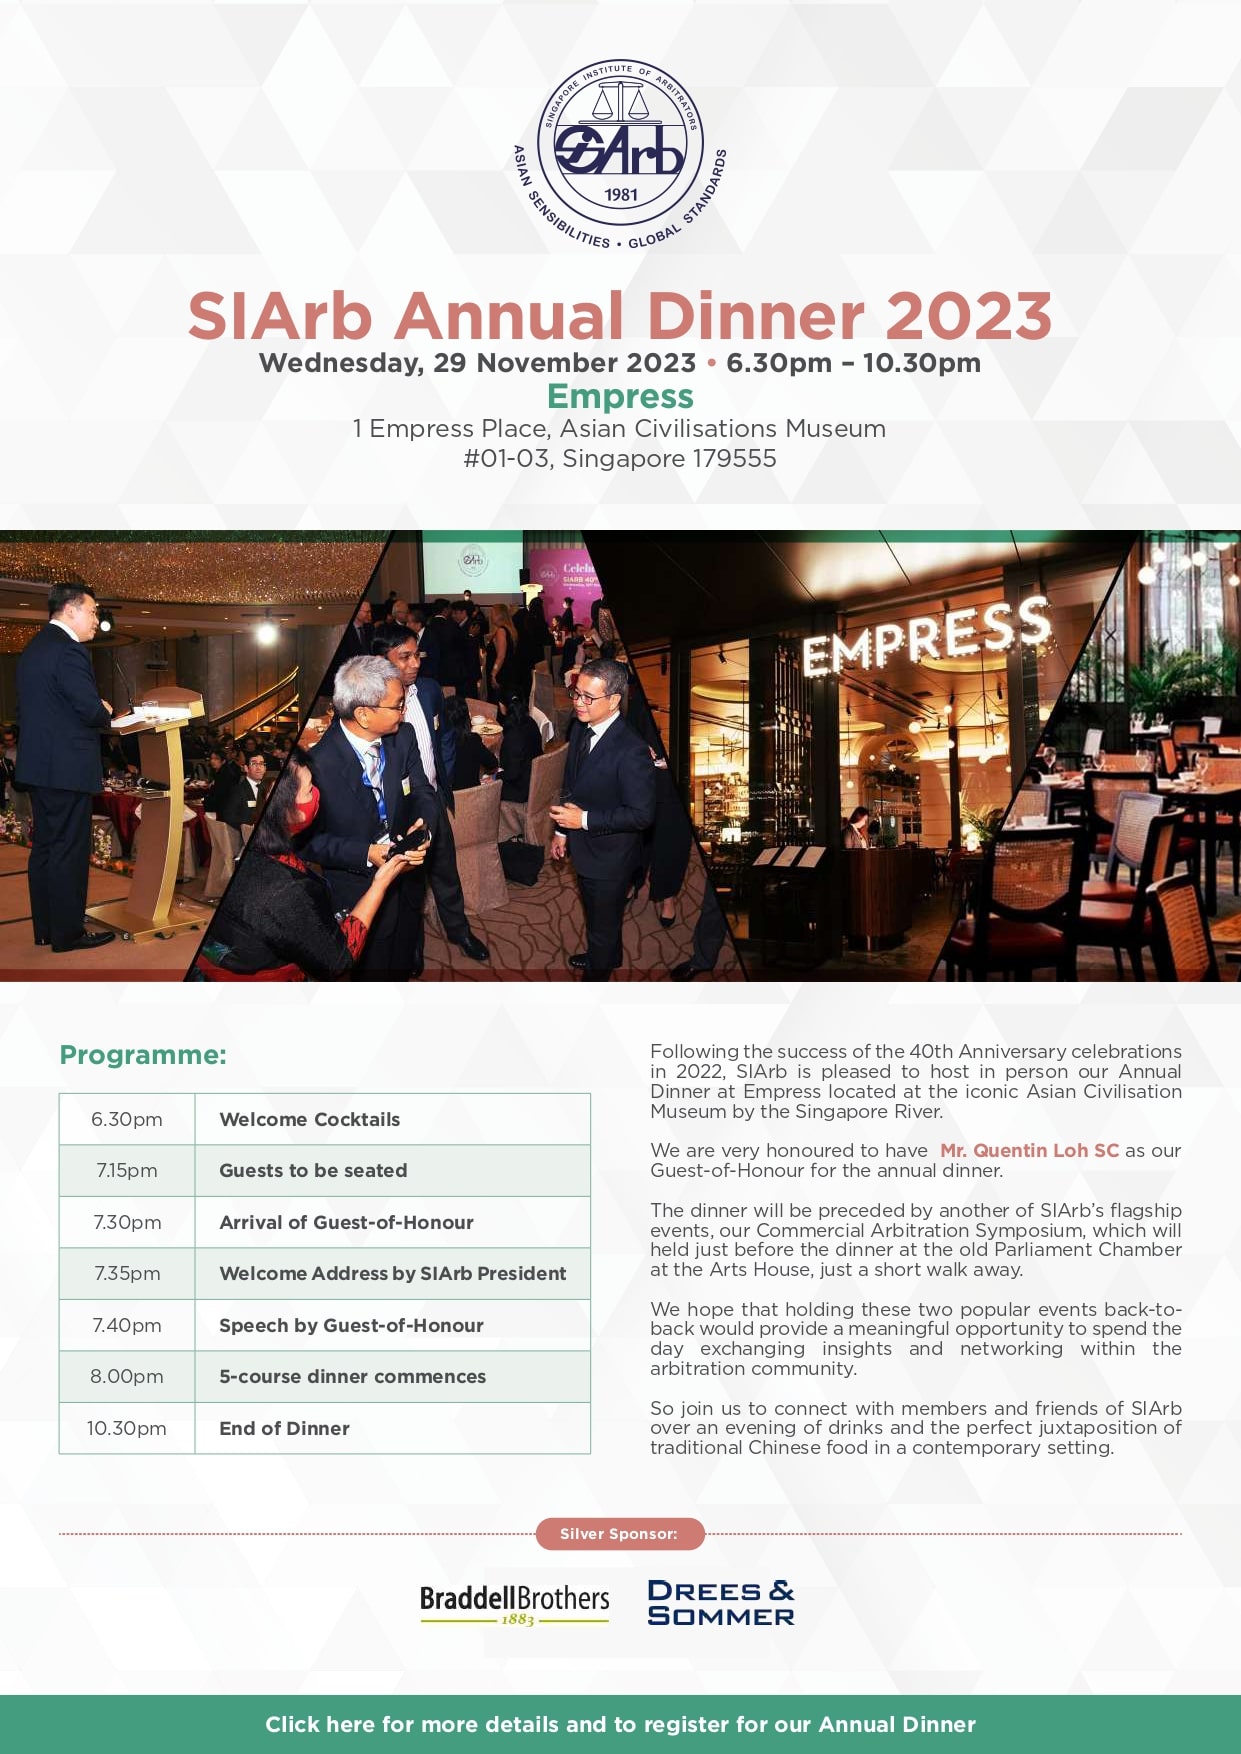 SIArb Annual Dinner 2023 page 1